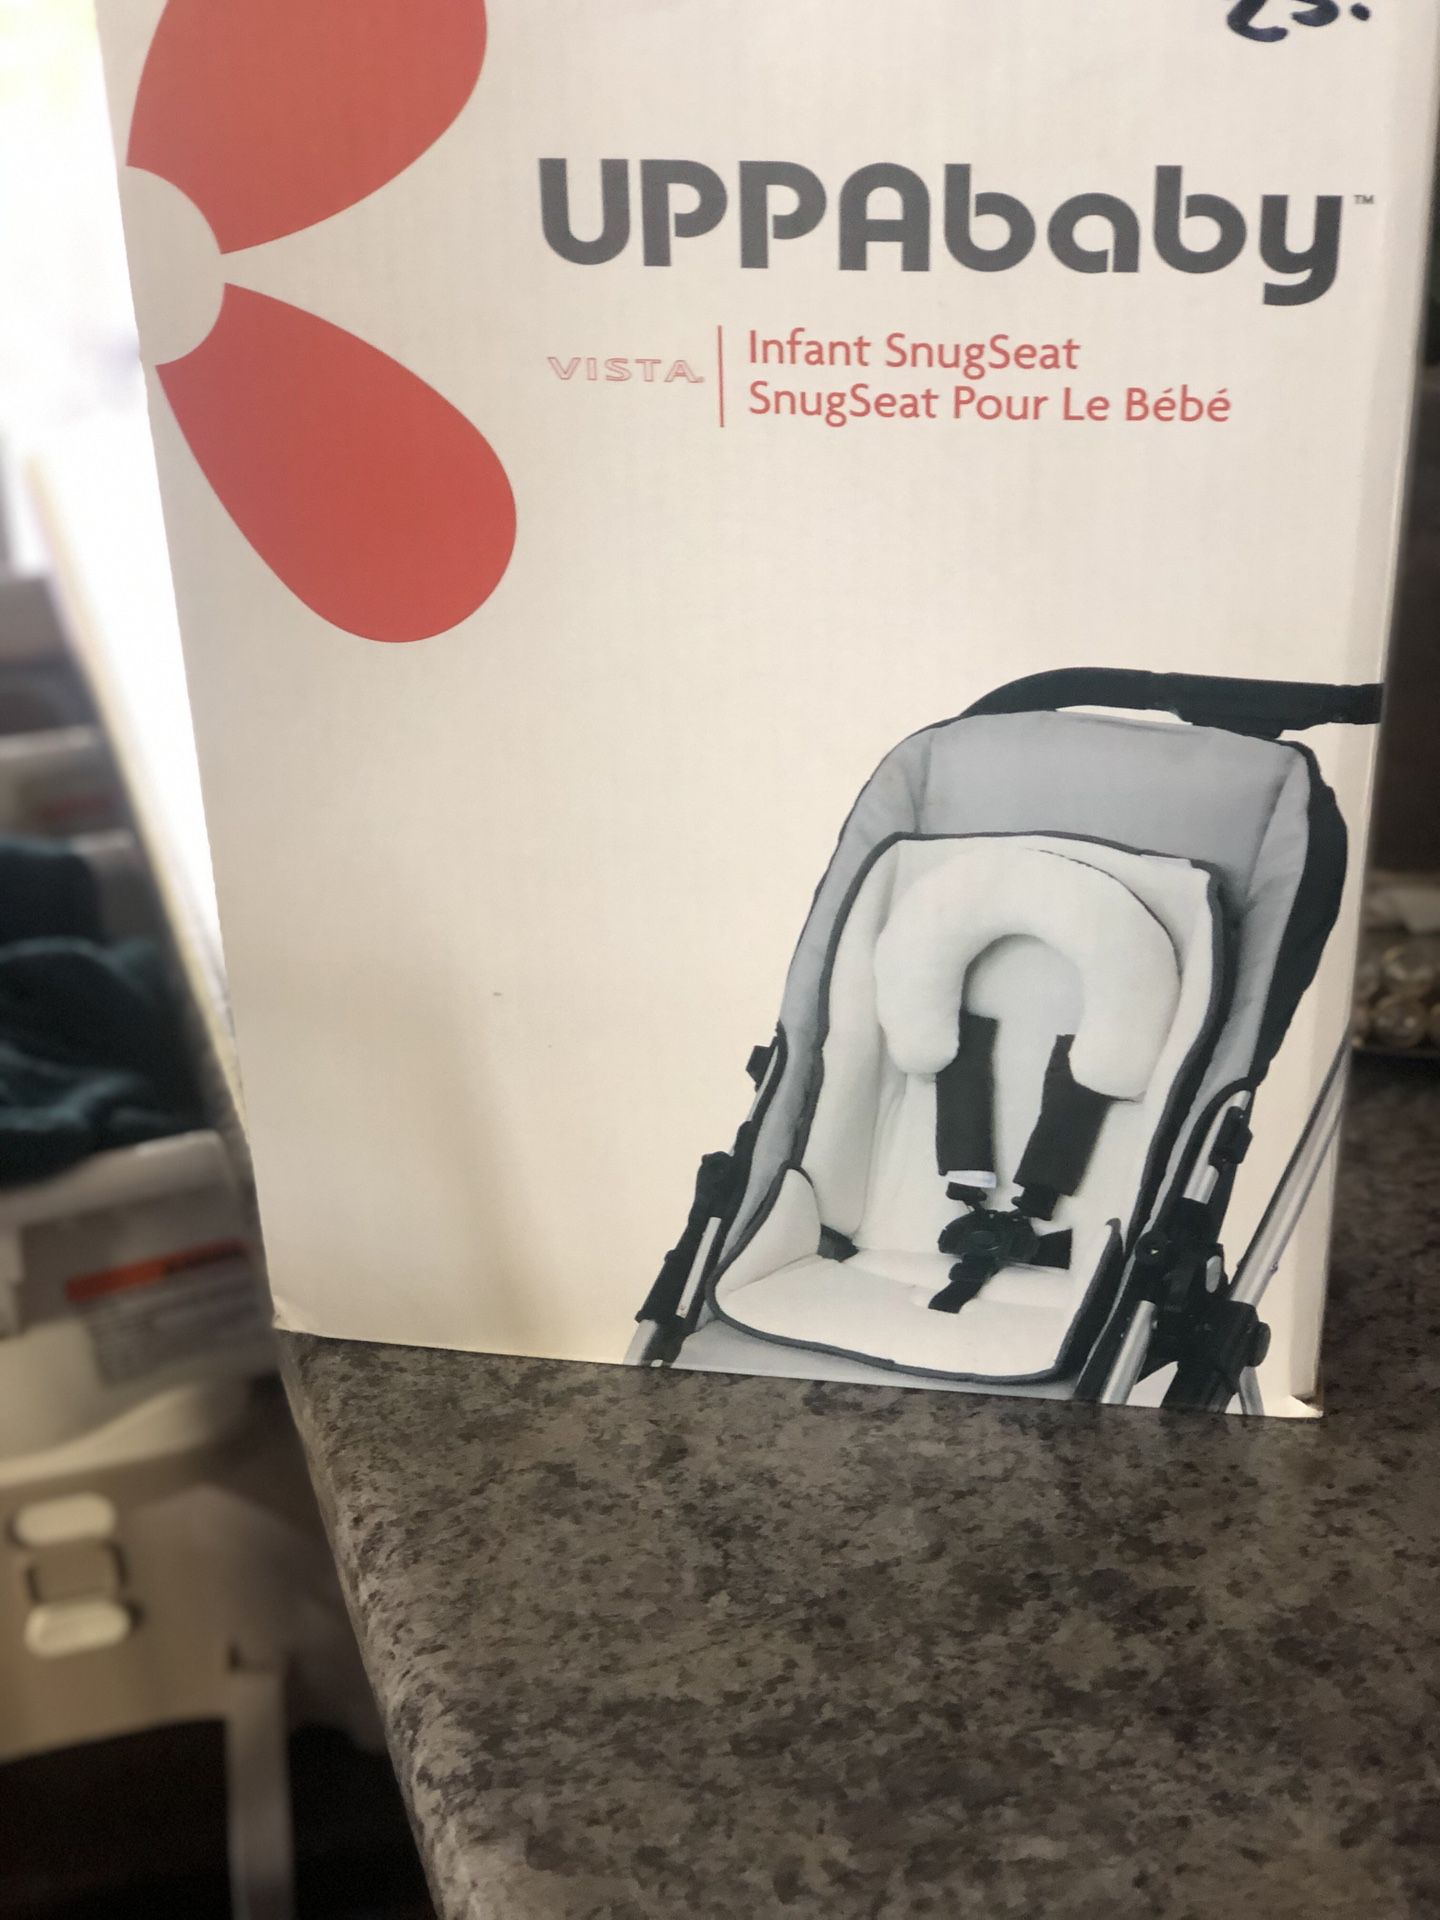 UPPAbaby infant snugseat